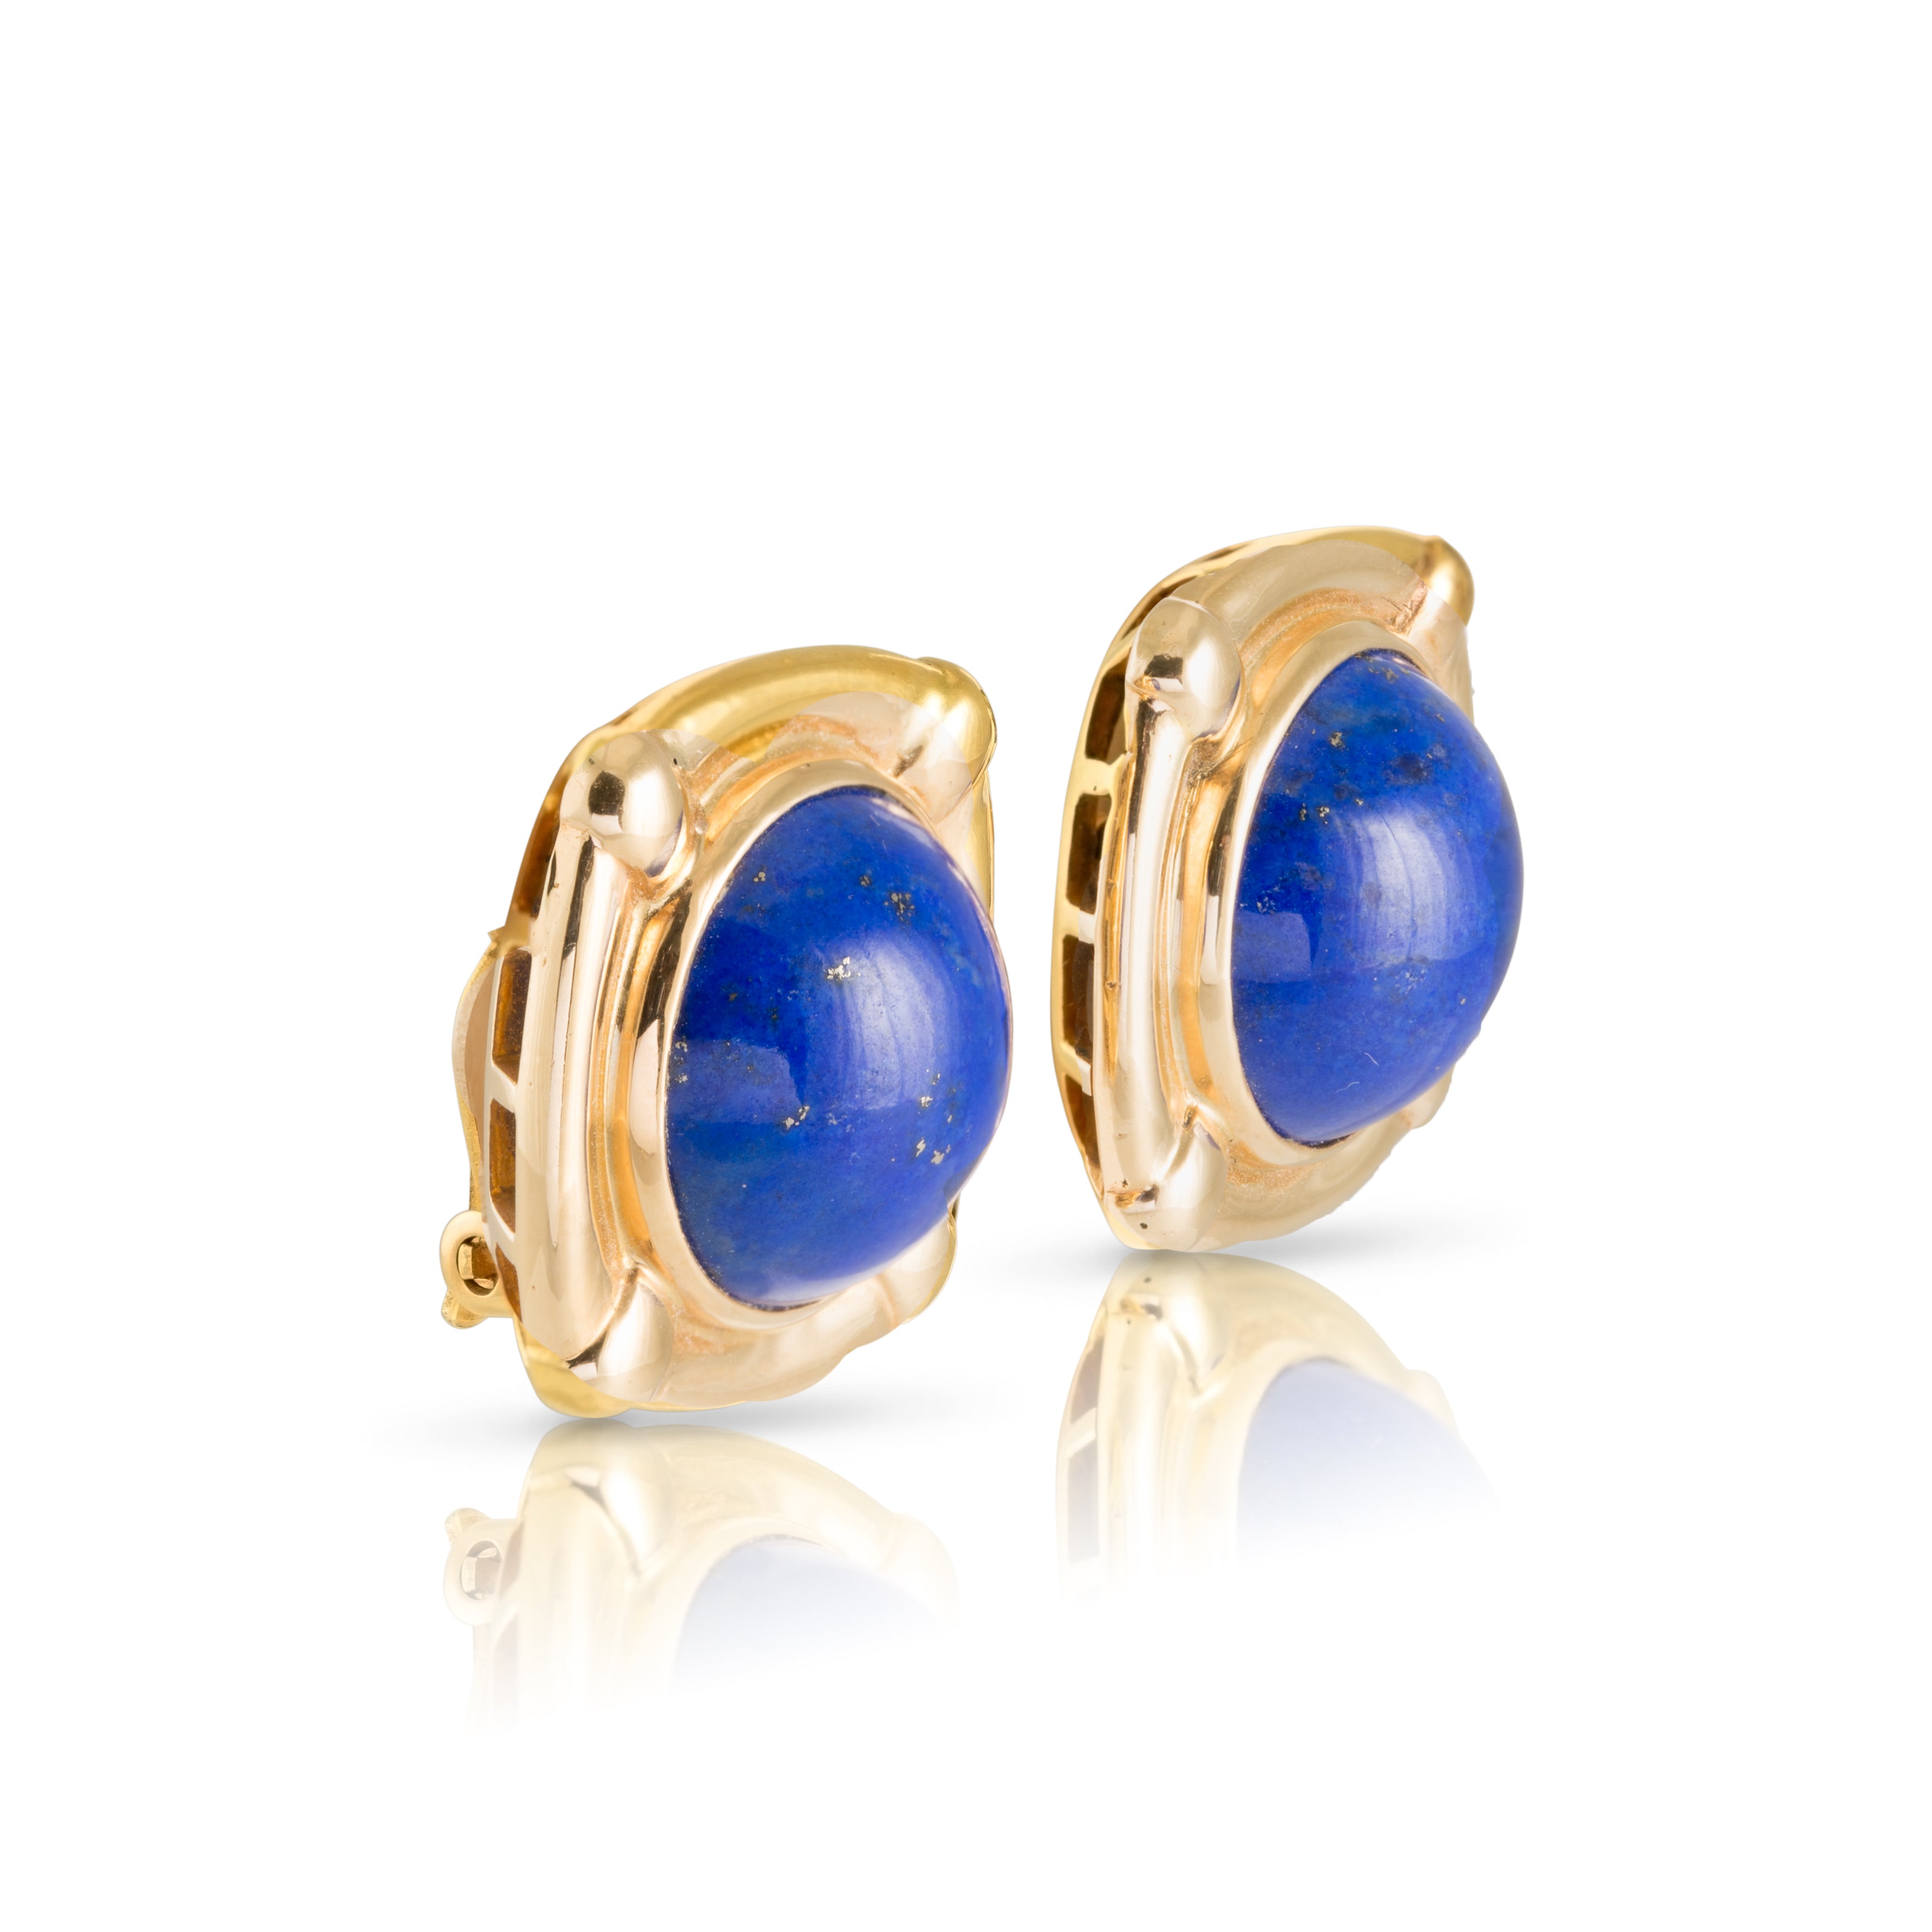 Side view of gold square earrings with lapis lazuli centres.